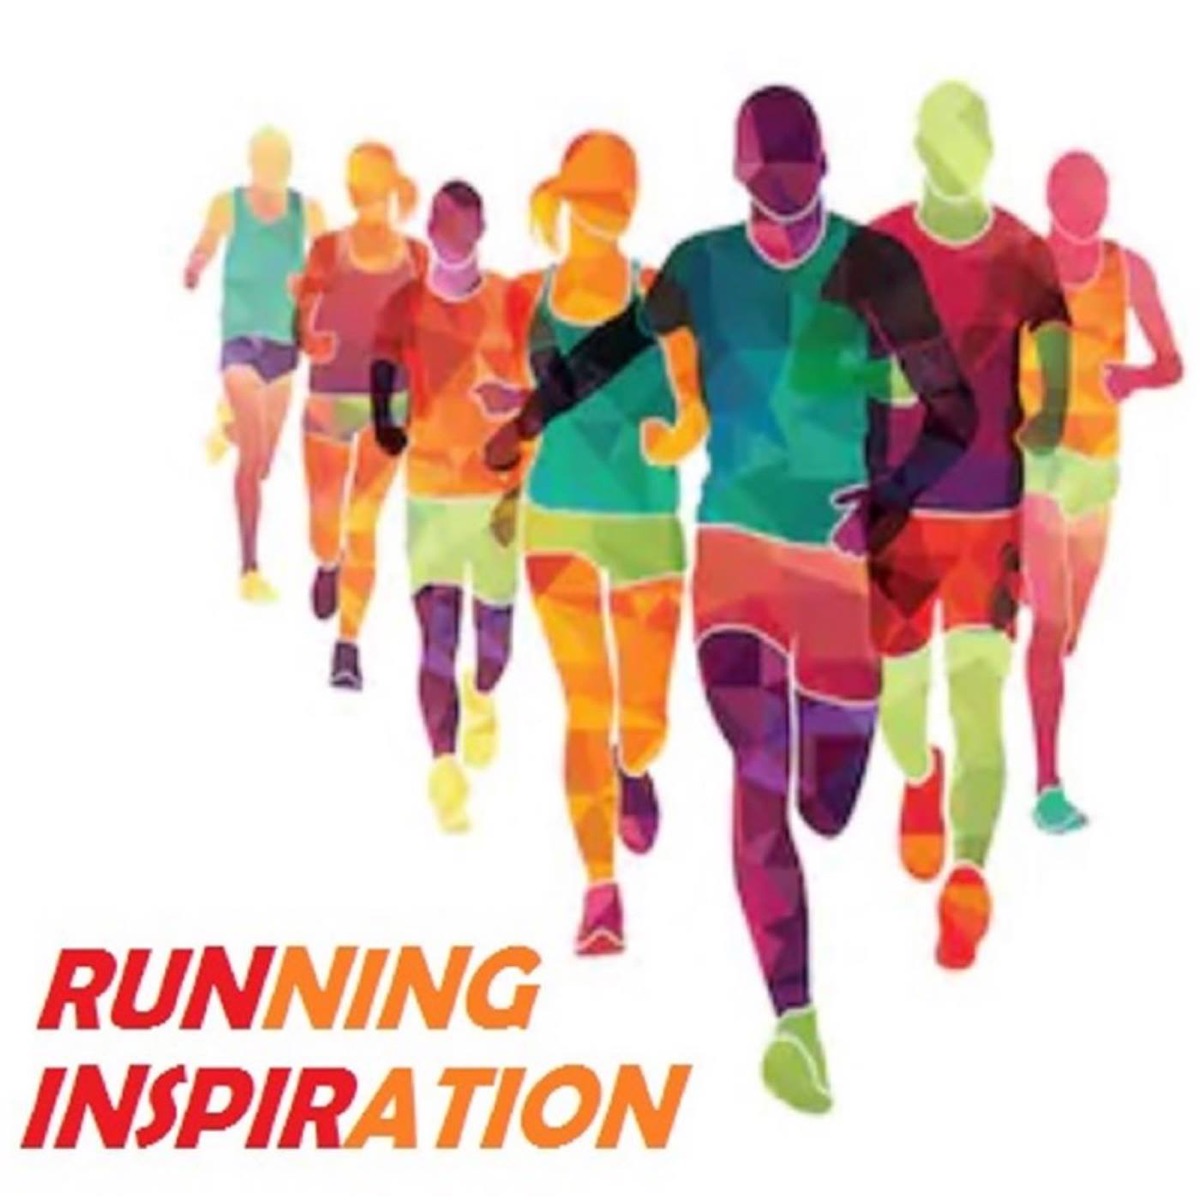 Runner Things #133: Truly, I love running. It's who I am. It's a